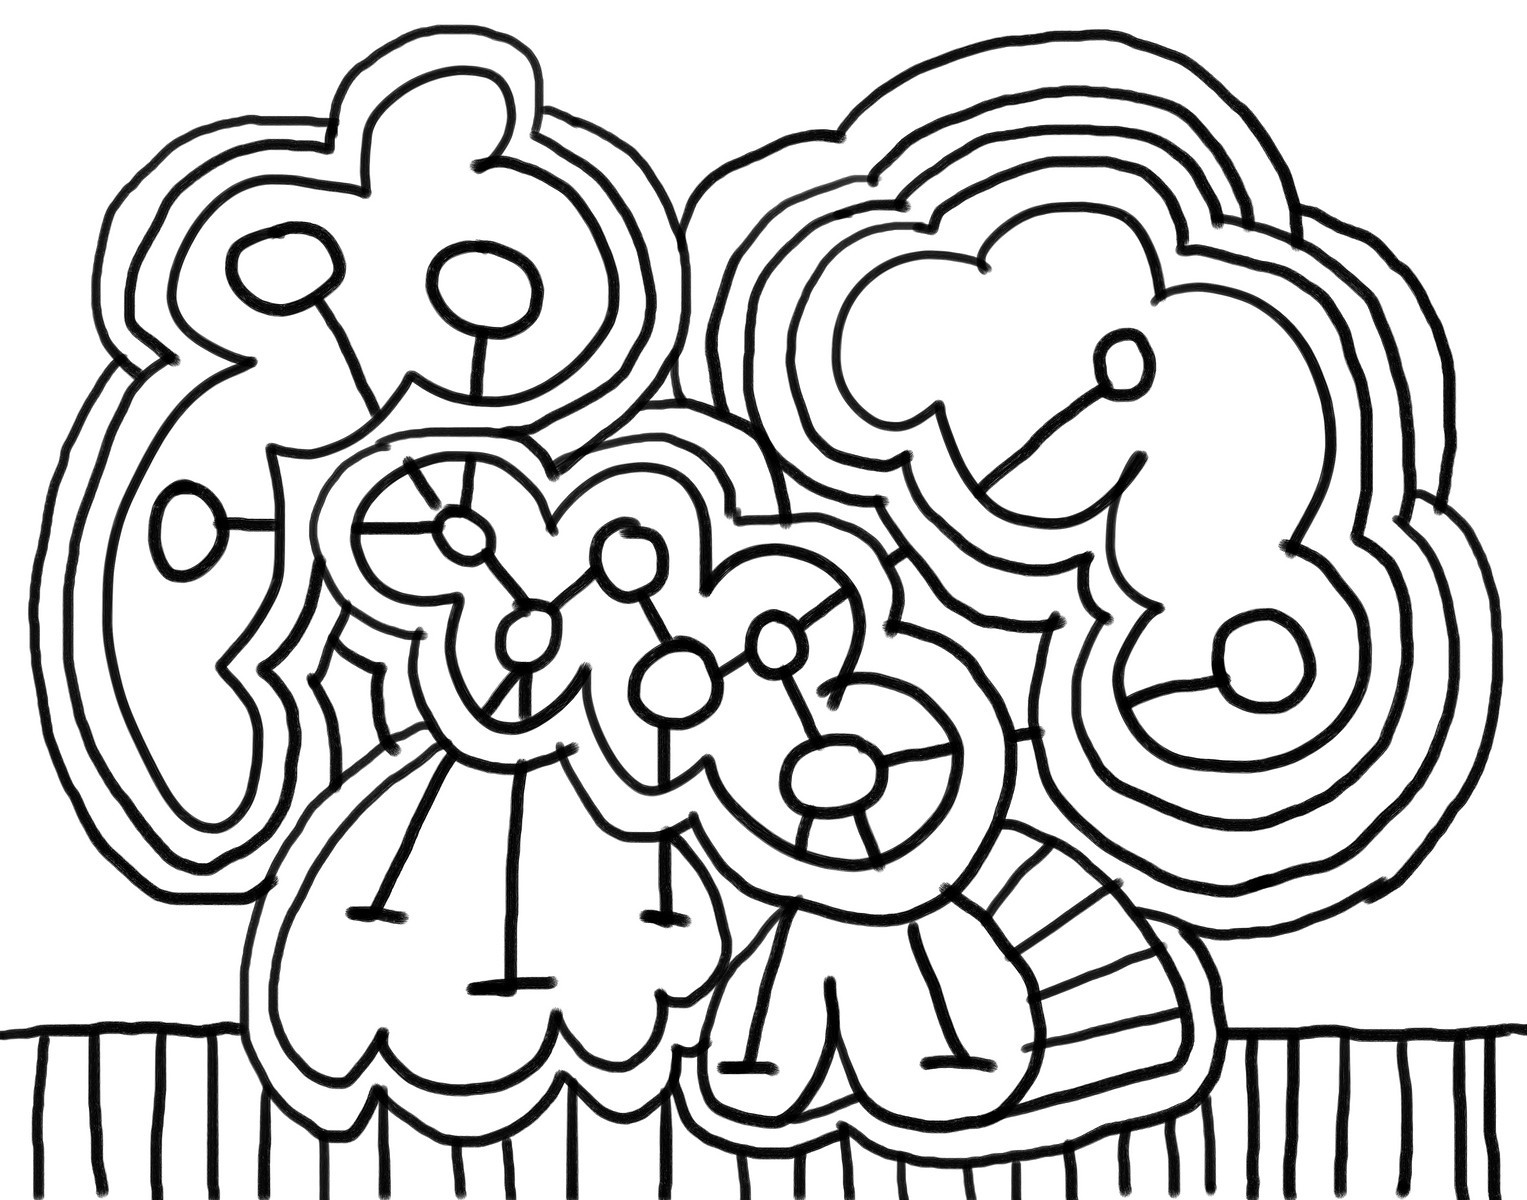 7 Habits Coloring Pages Free download on ClipArtMag